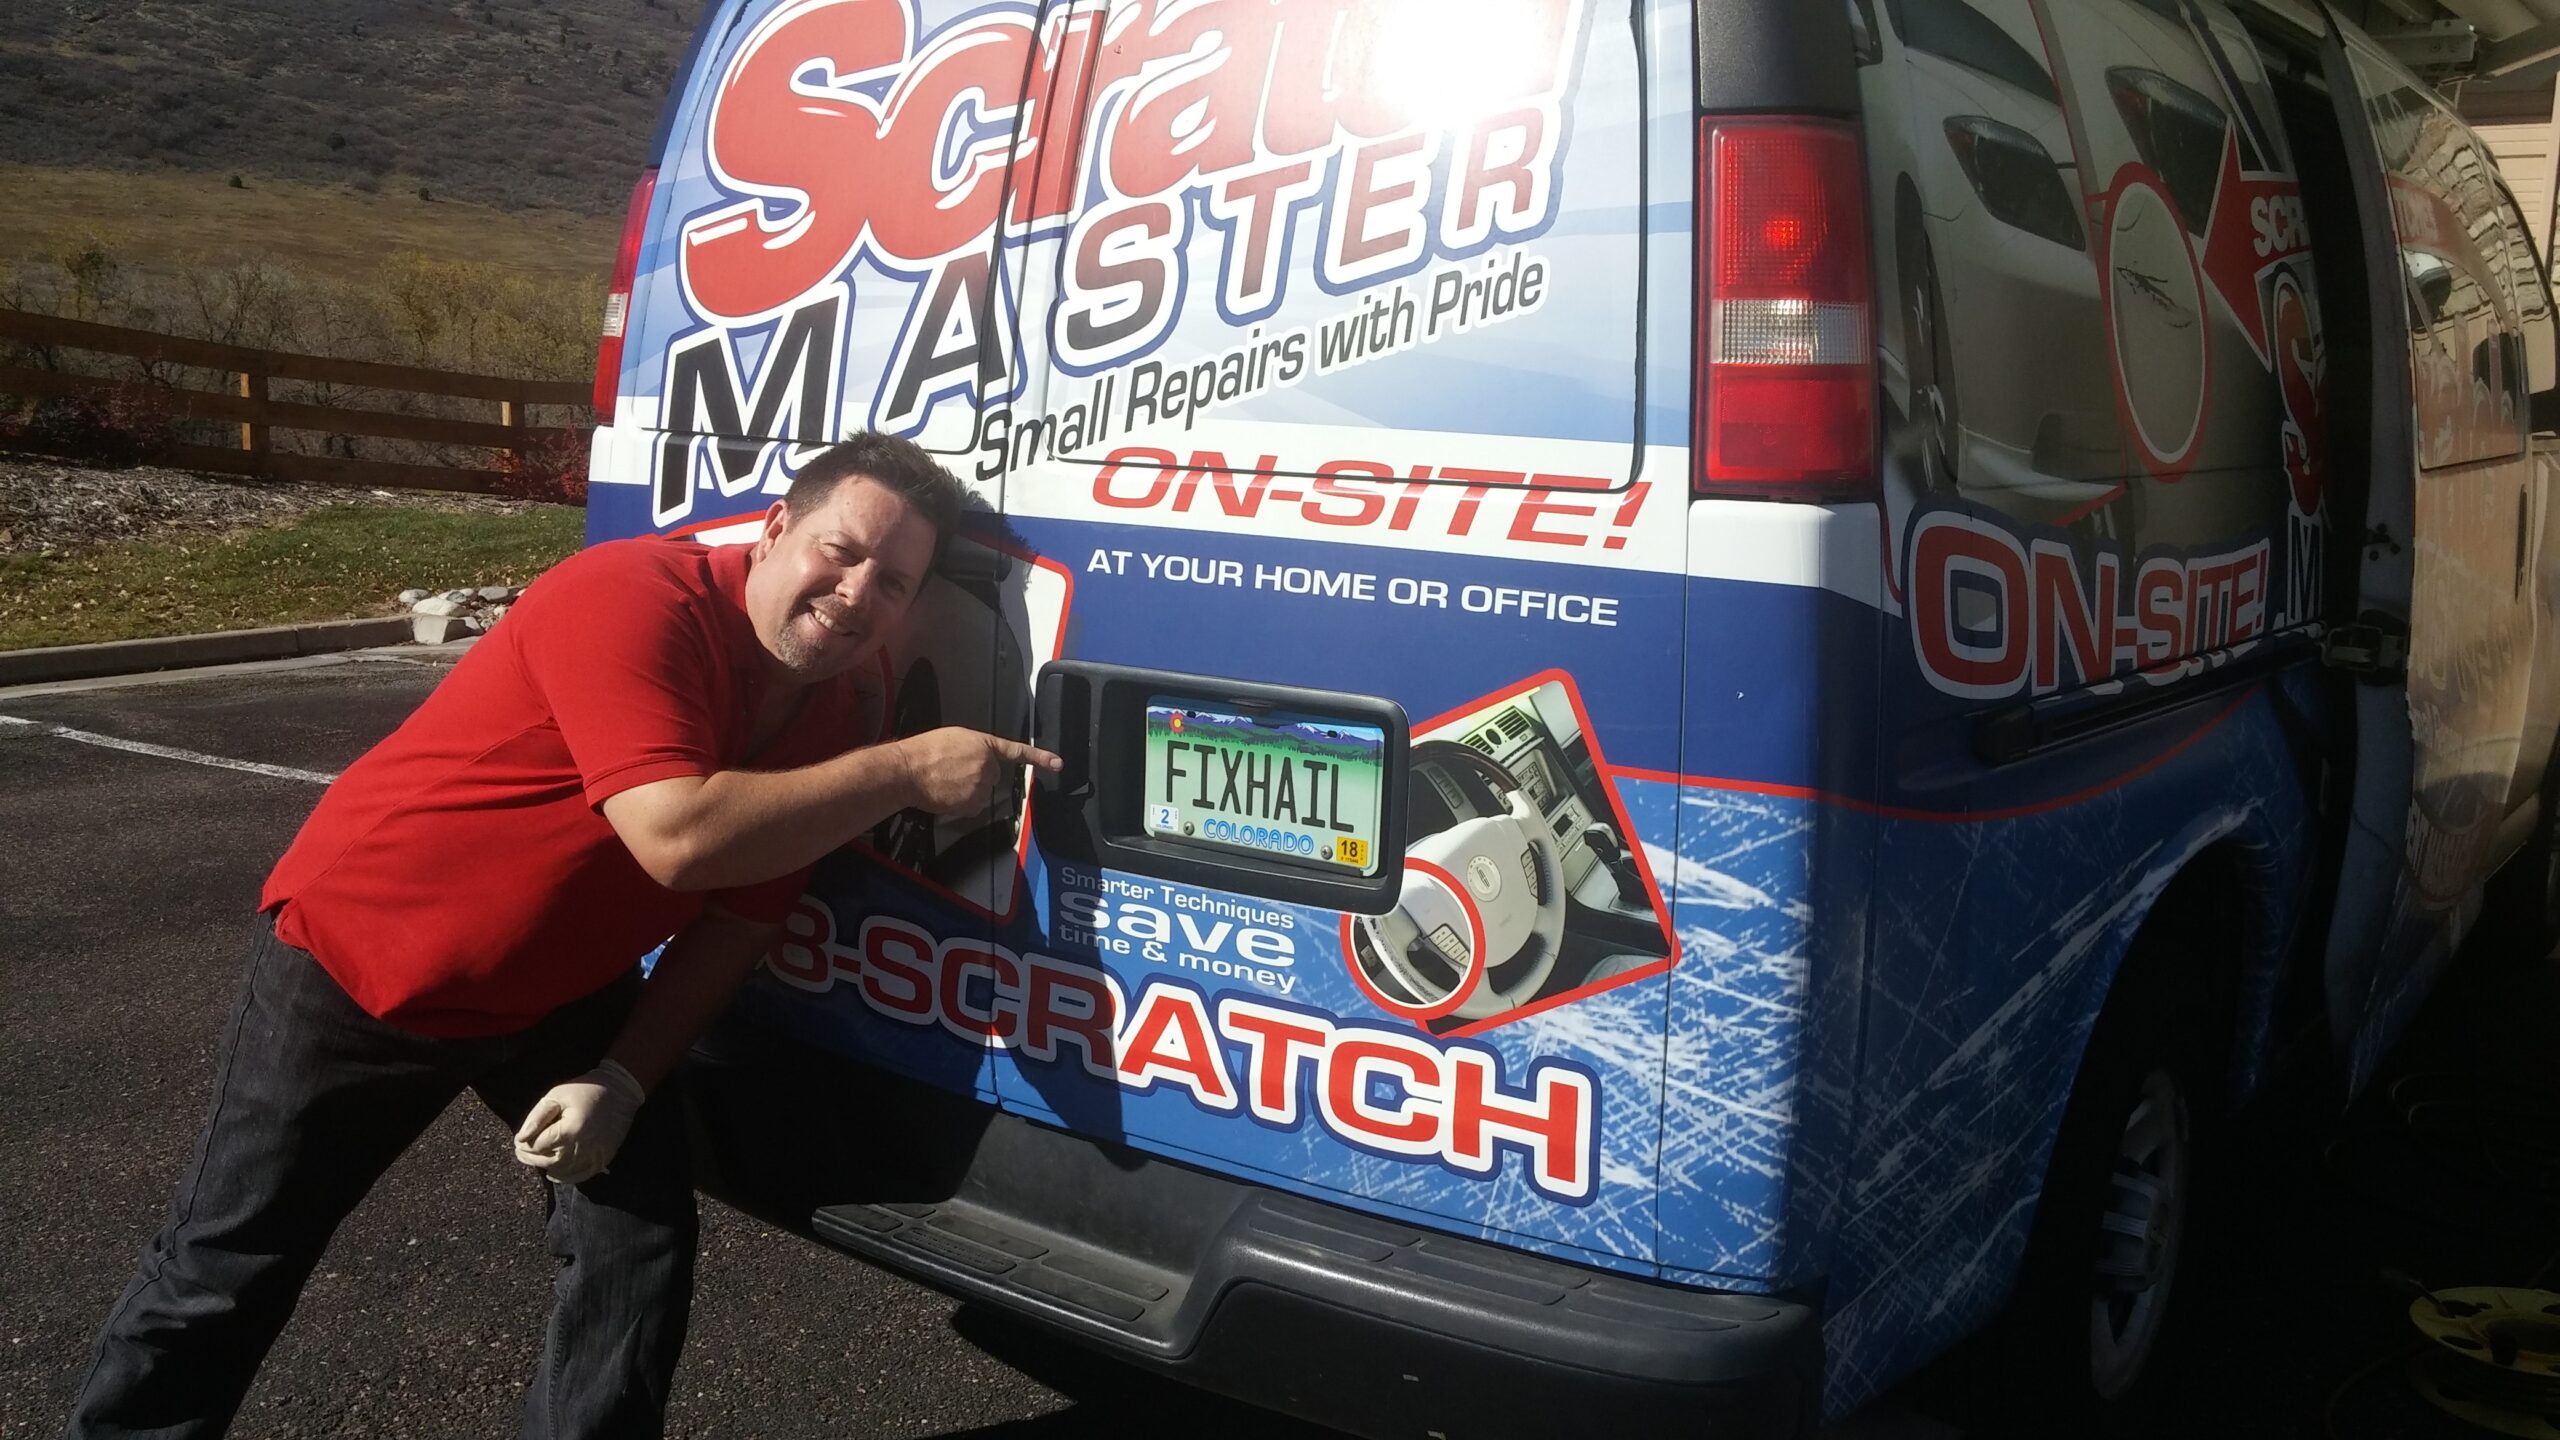 Meet Brian the owner of the Scratch Master